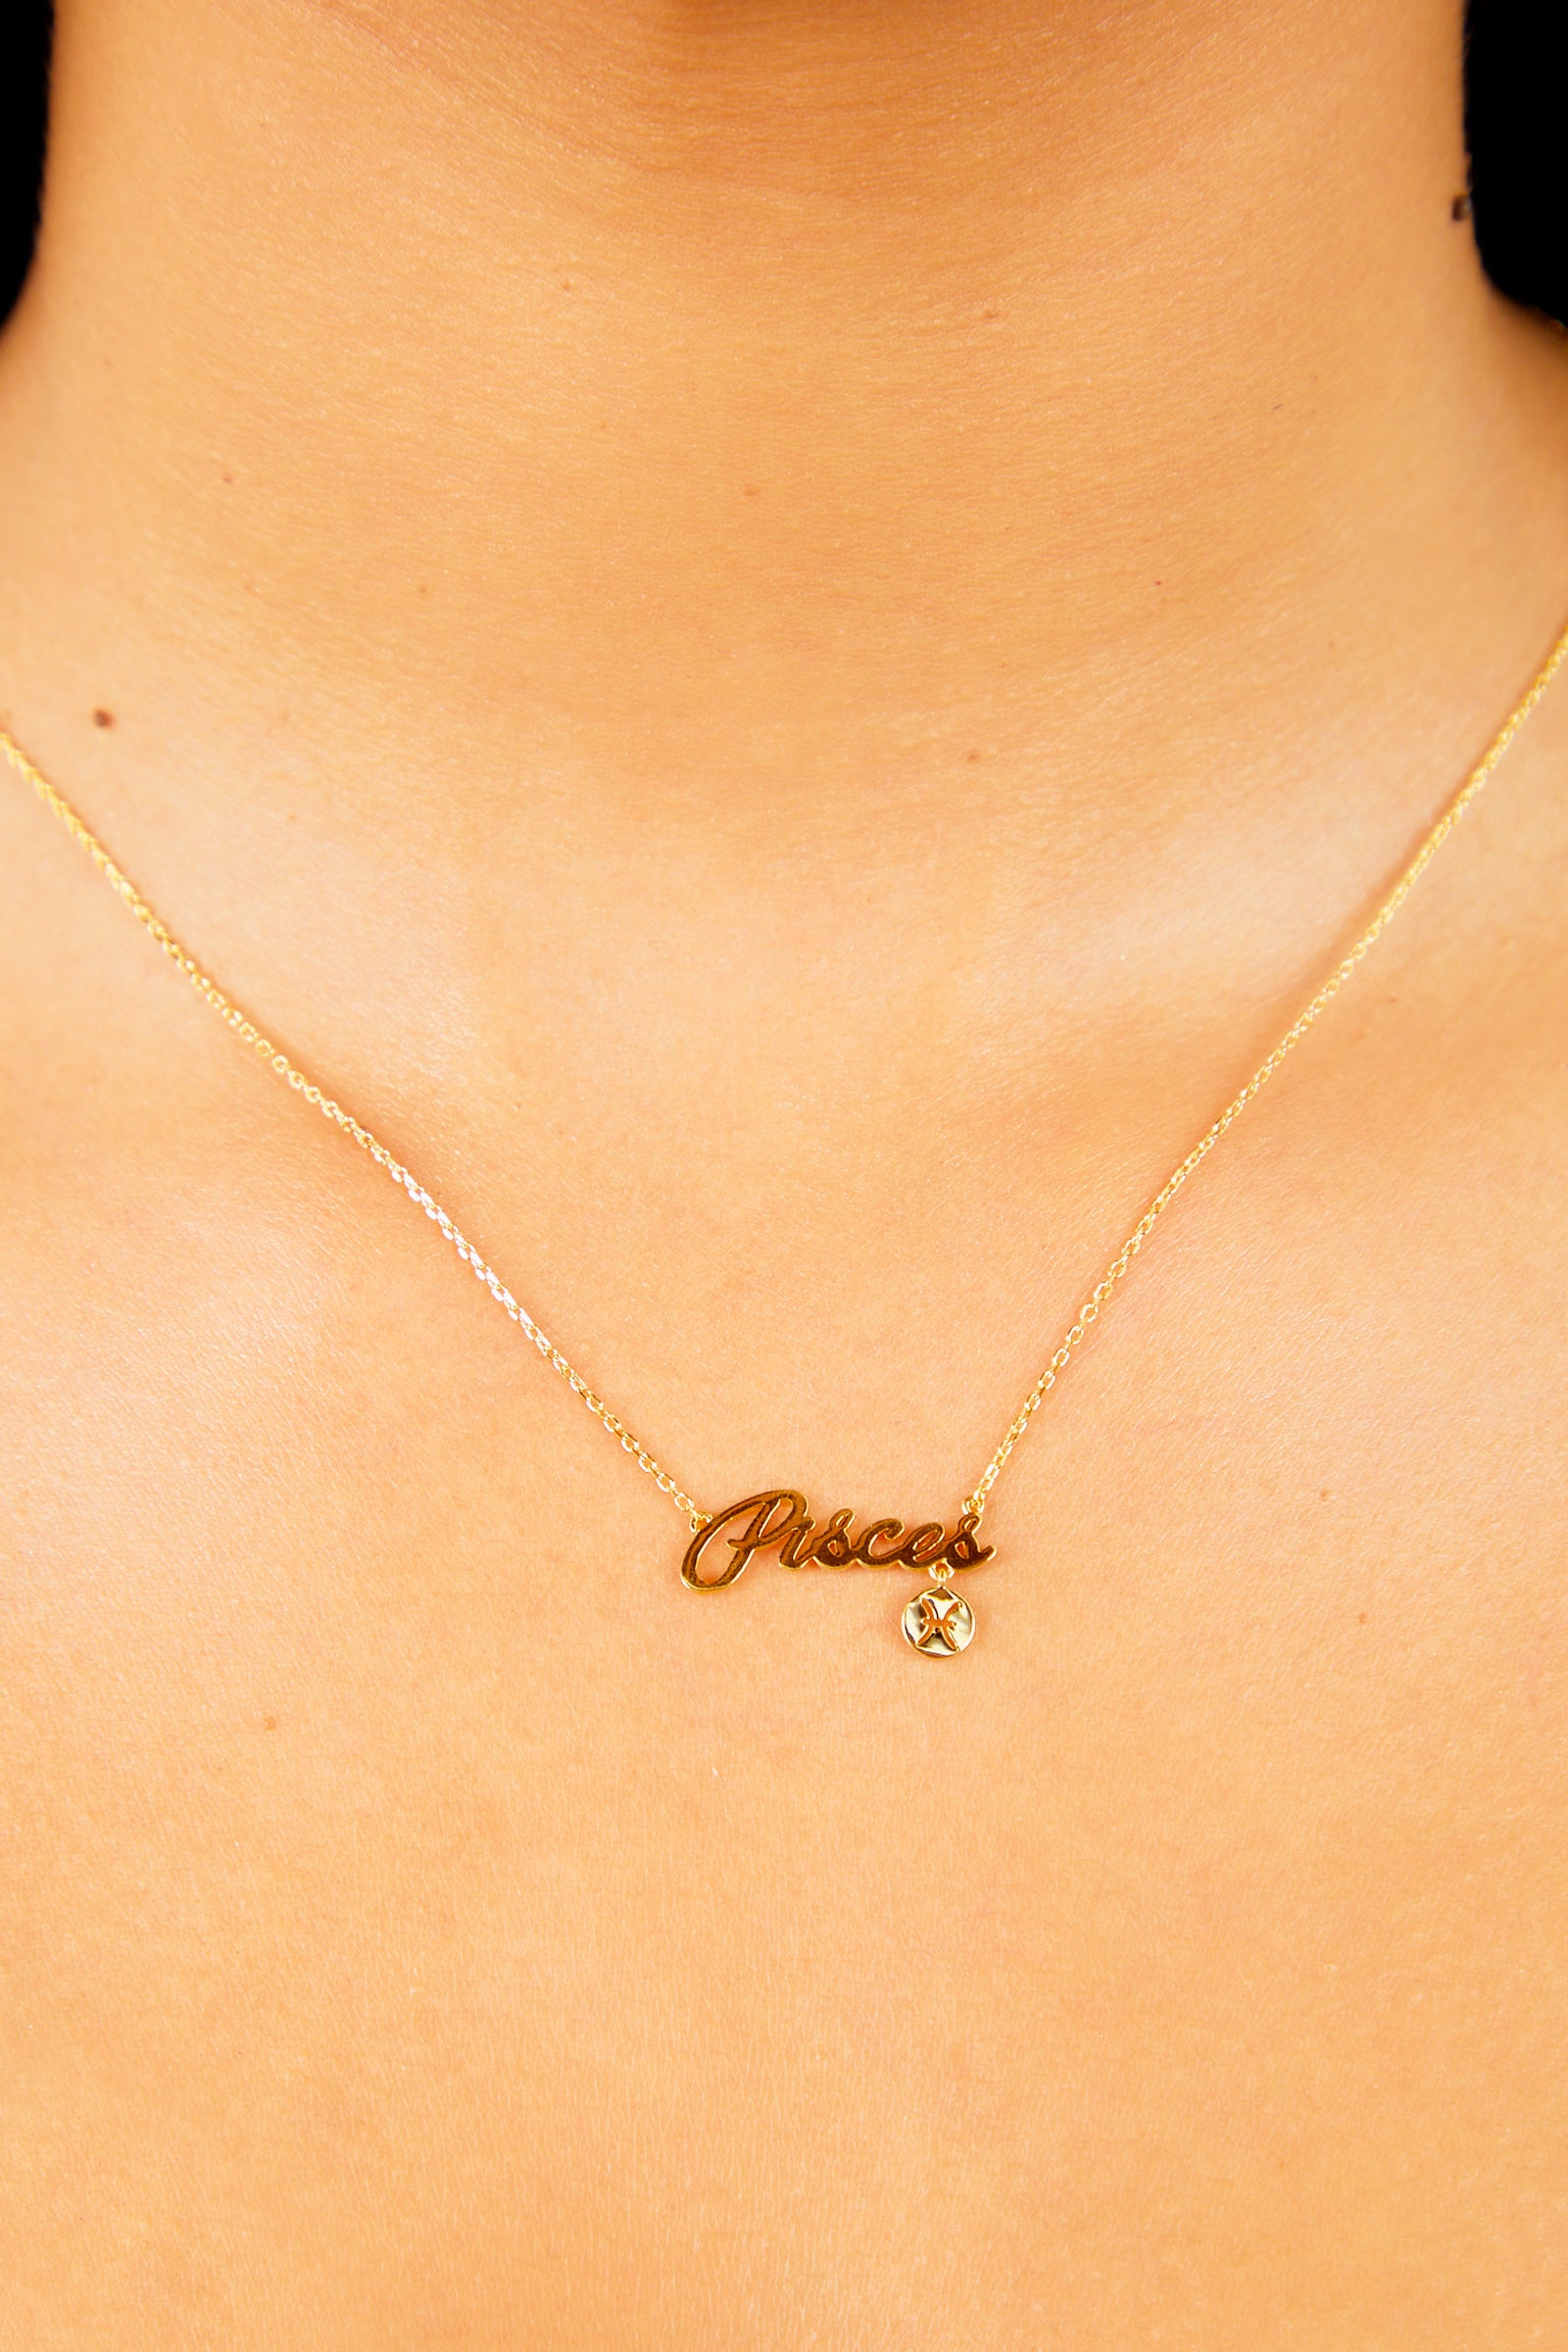 Pisces Nameplate Necklace - Gold